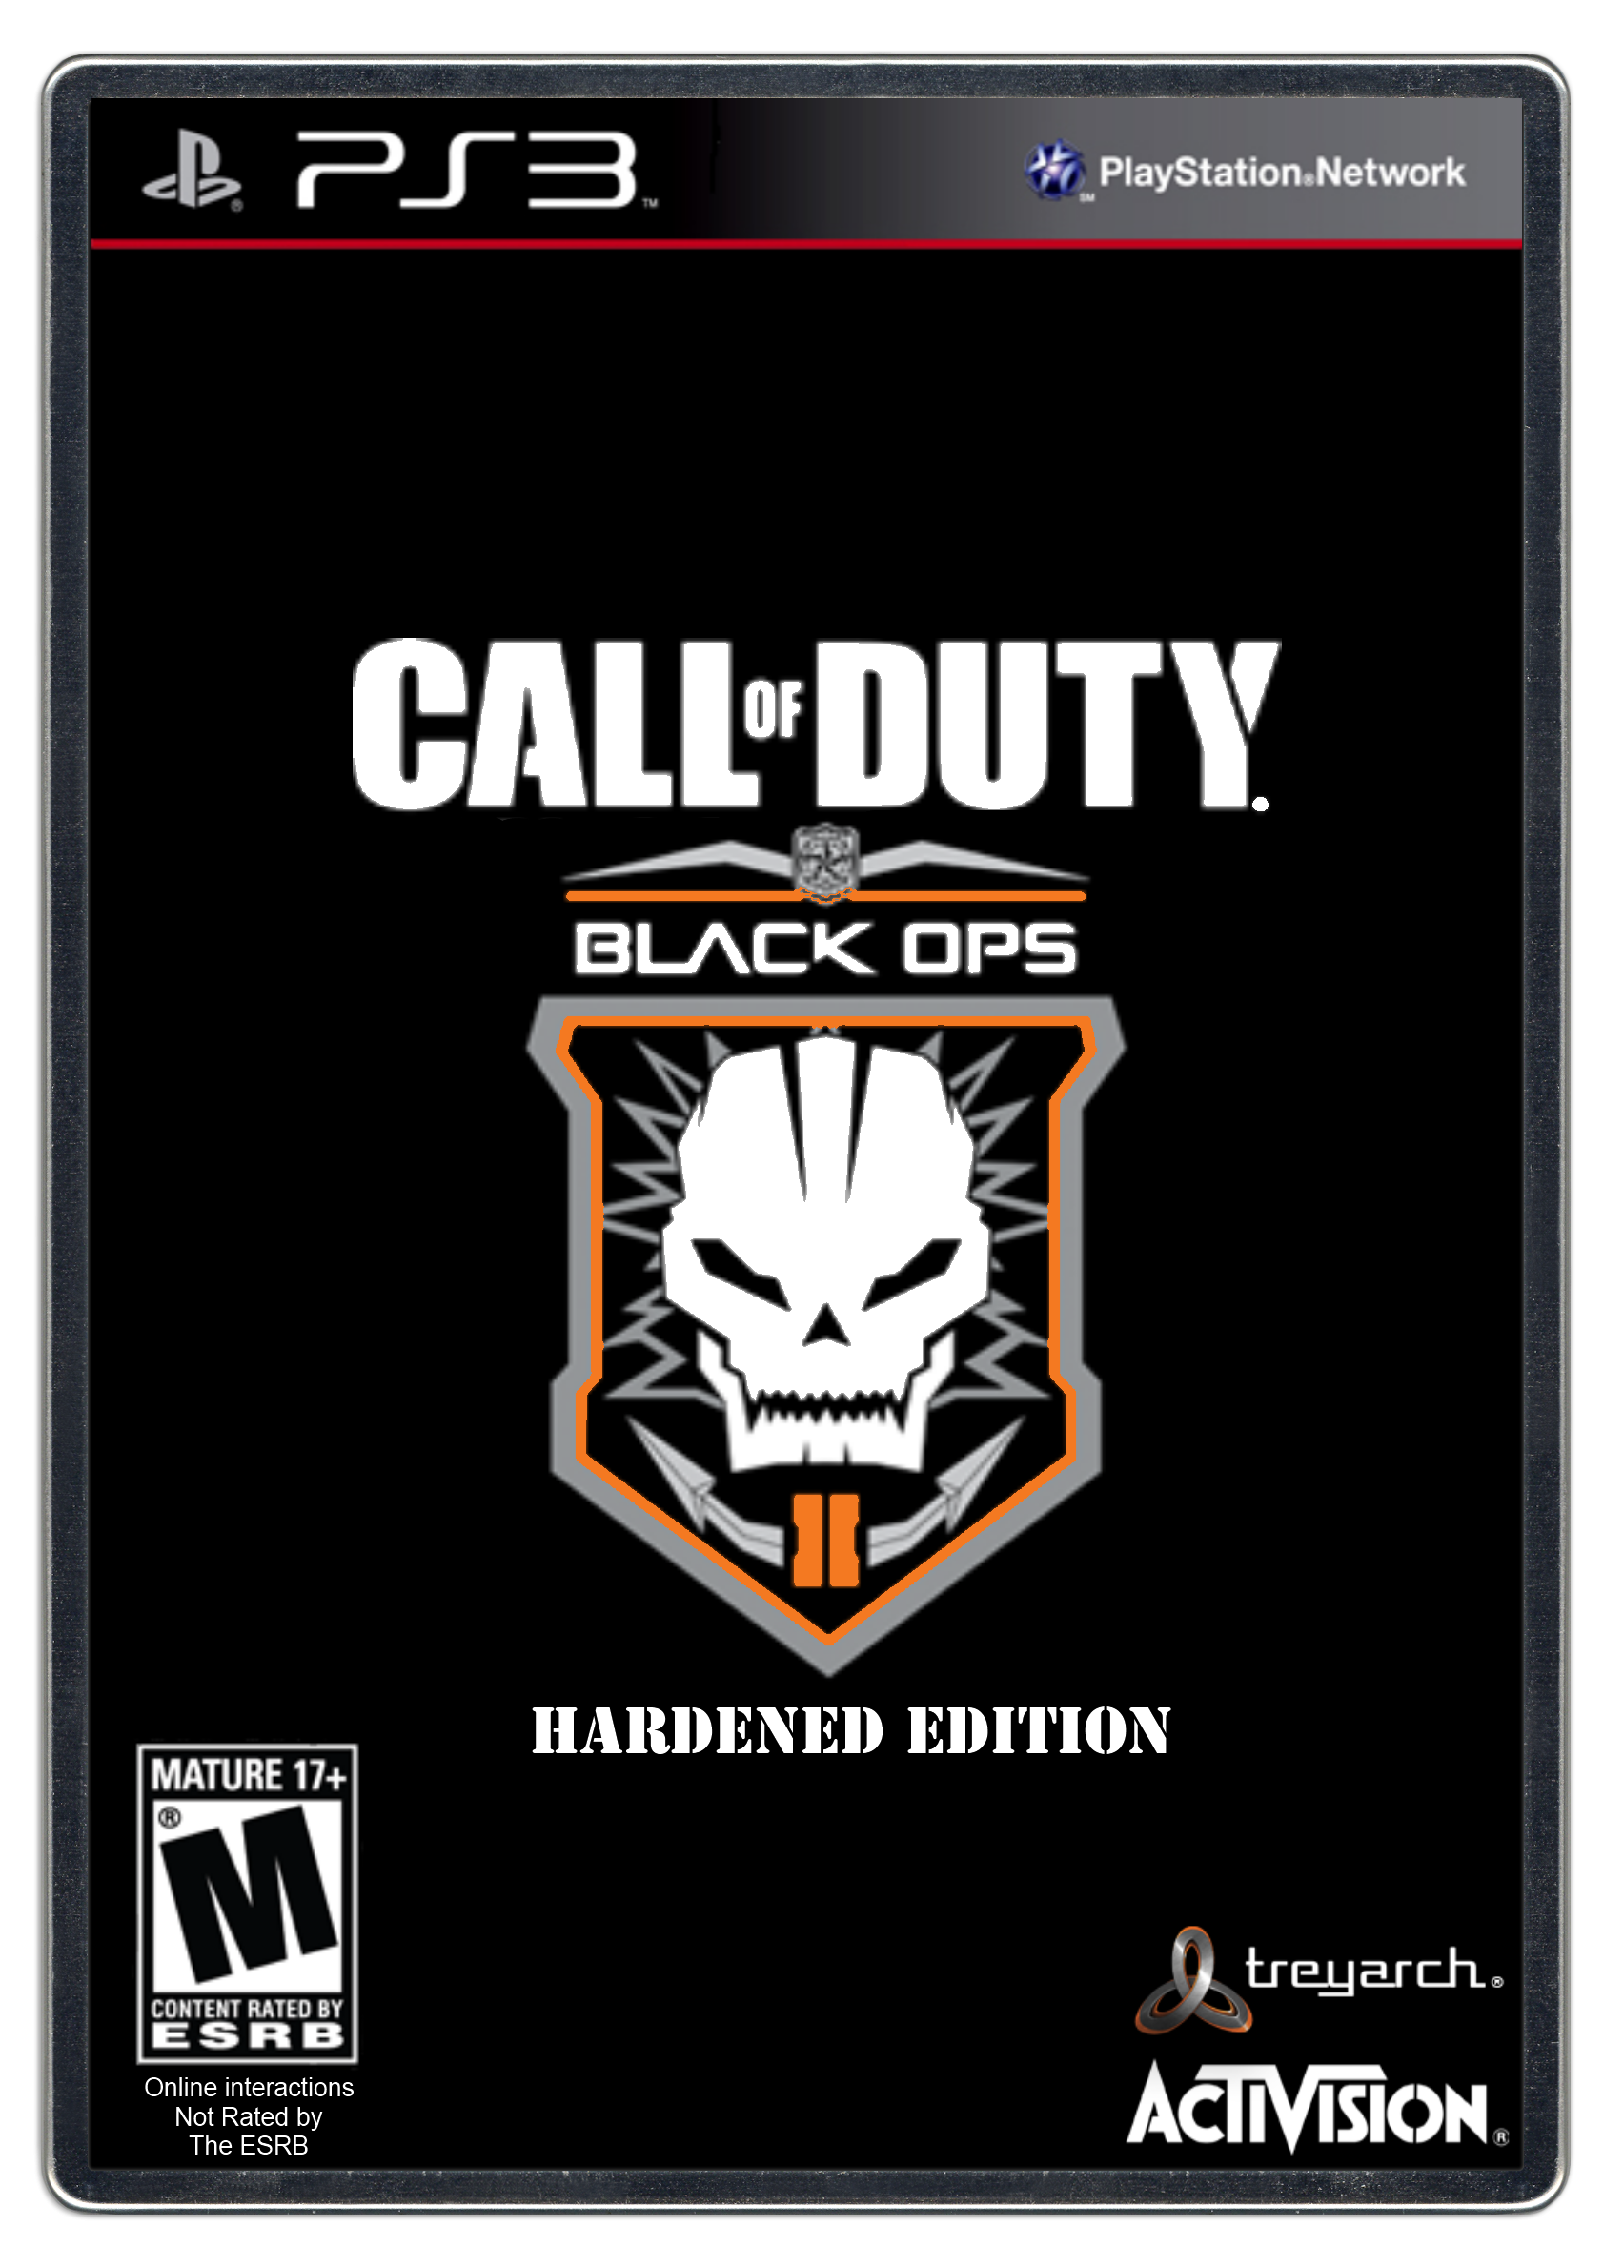 Call of Duty Black Ops II Hardened Edition box cover